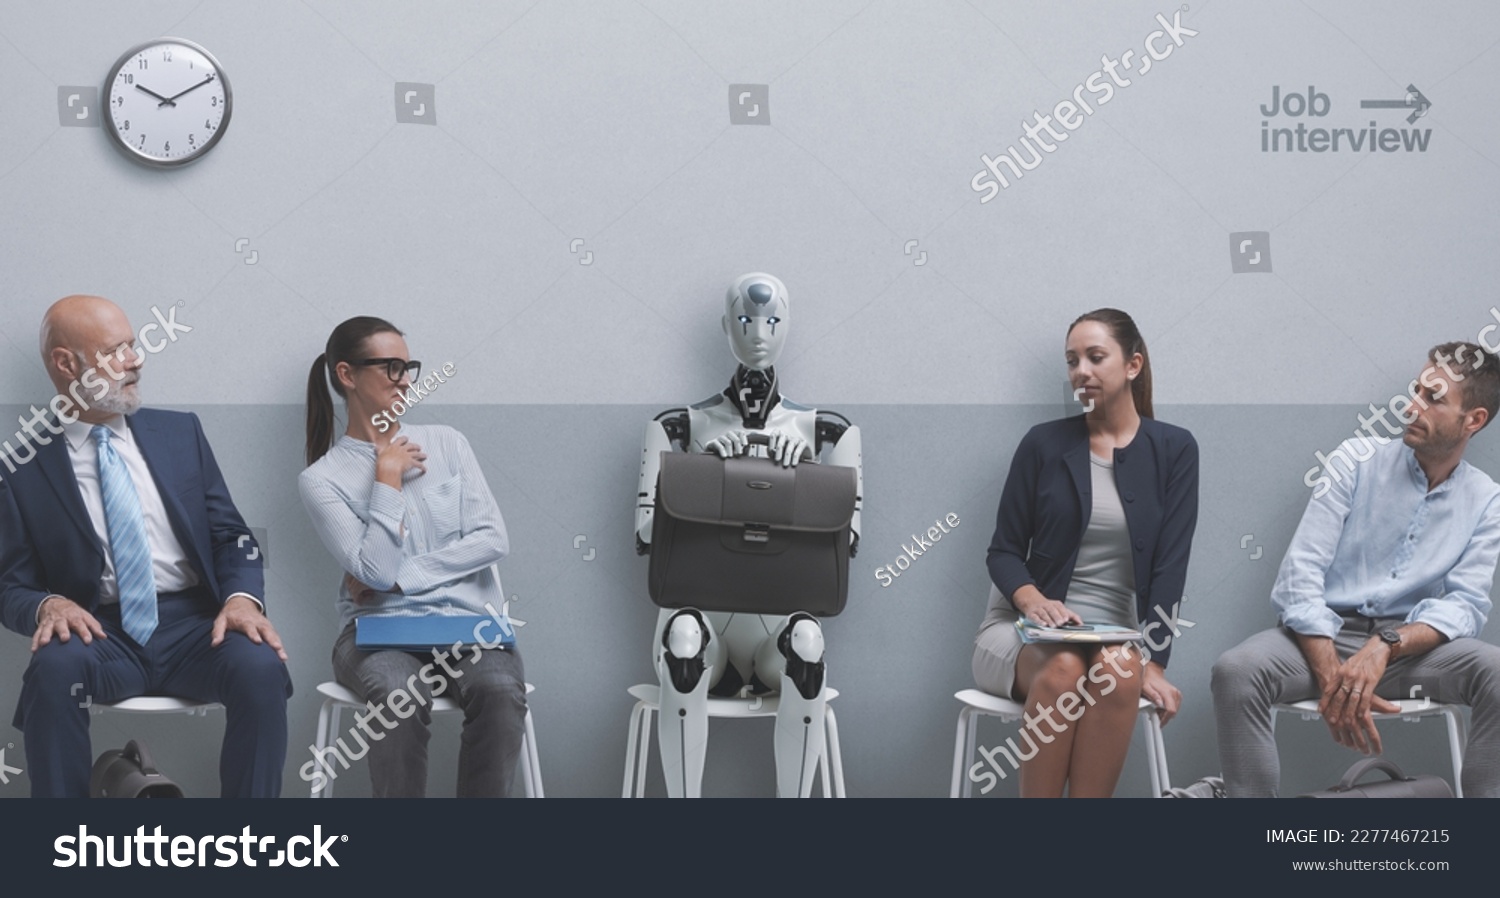 Disappointed job applicants sitting in the waiting room and staring at the AI robot candidate, they are waiting for the job interview #2277467215